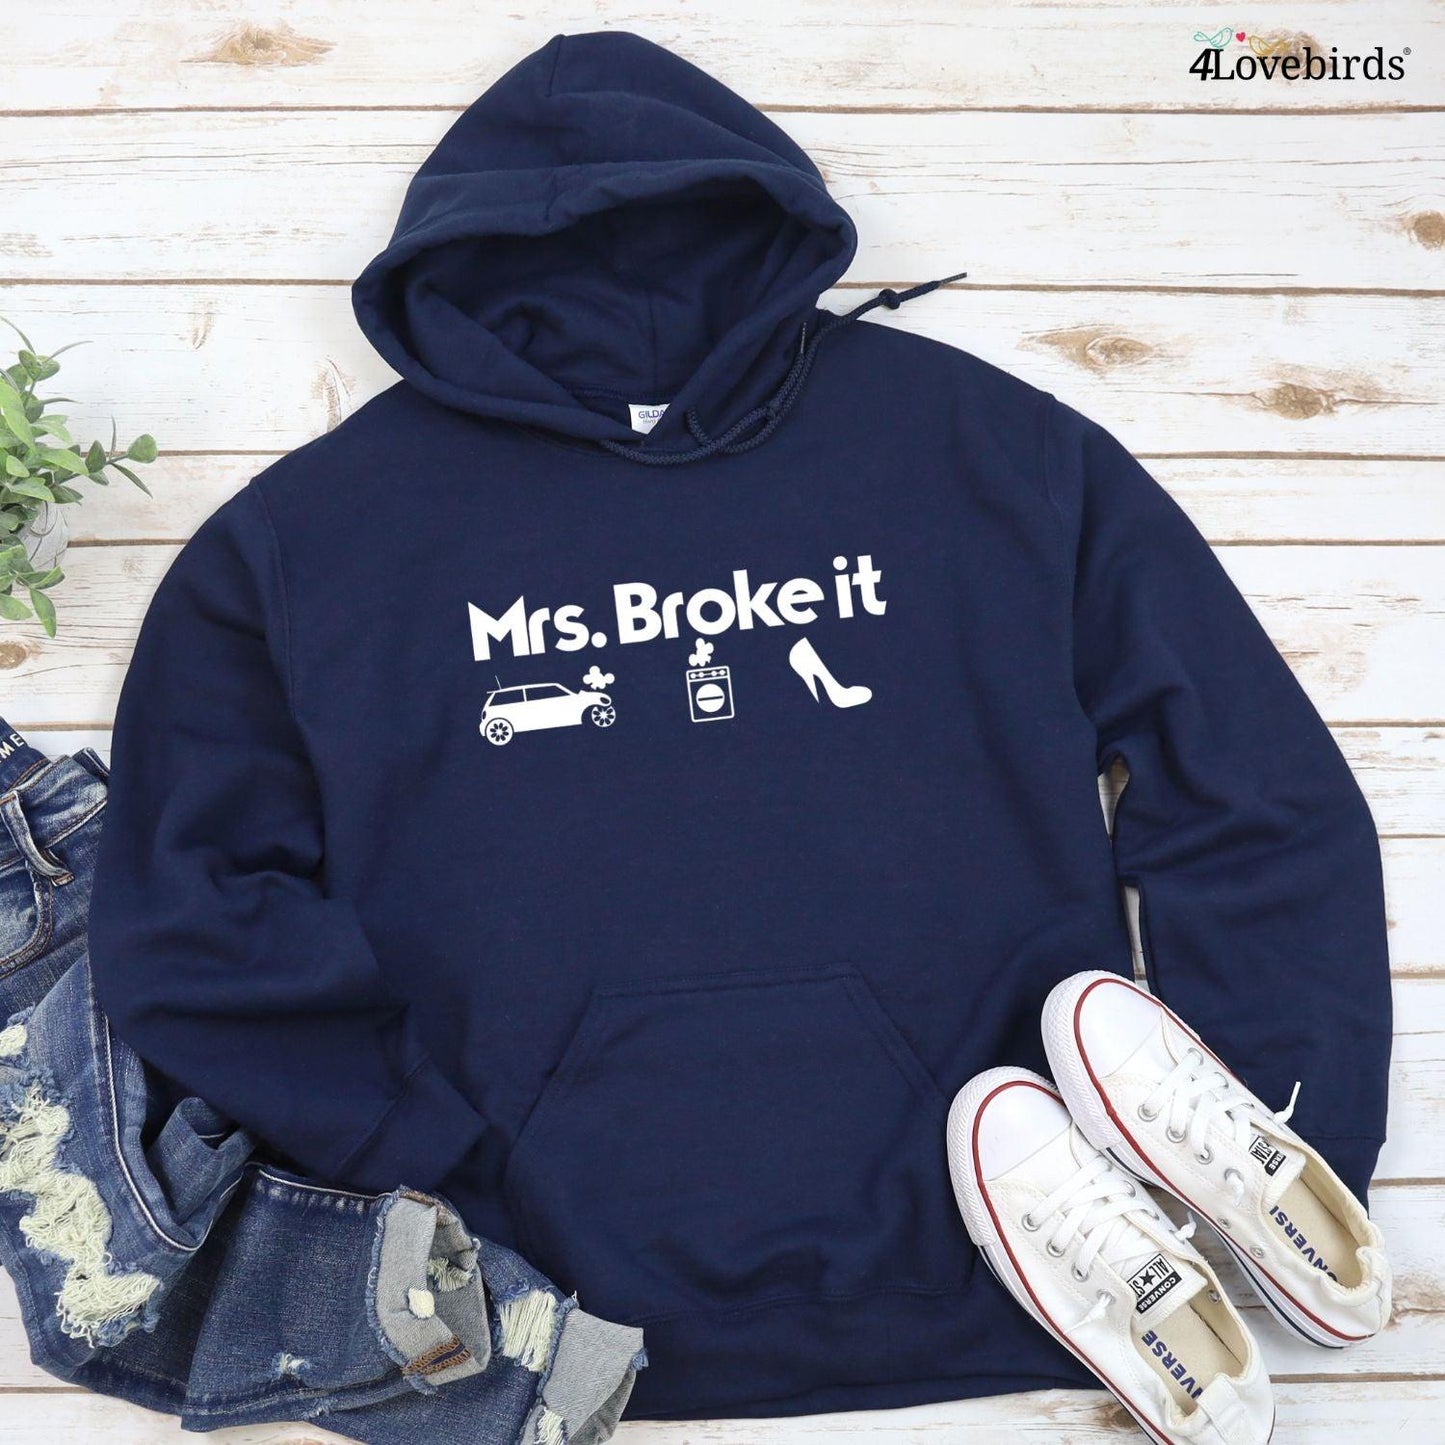 Mr Fix it | Mrs Broke it - Funny Matching Set for Couples - 4Lovebirds